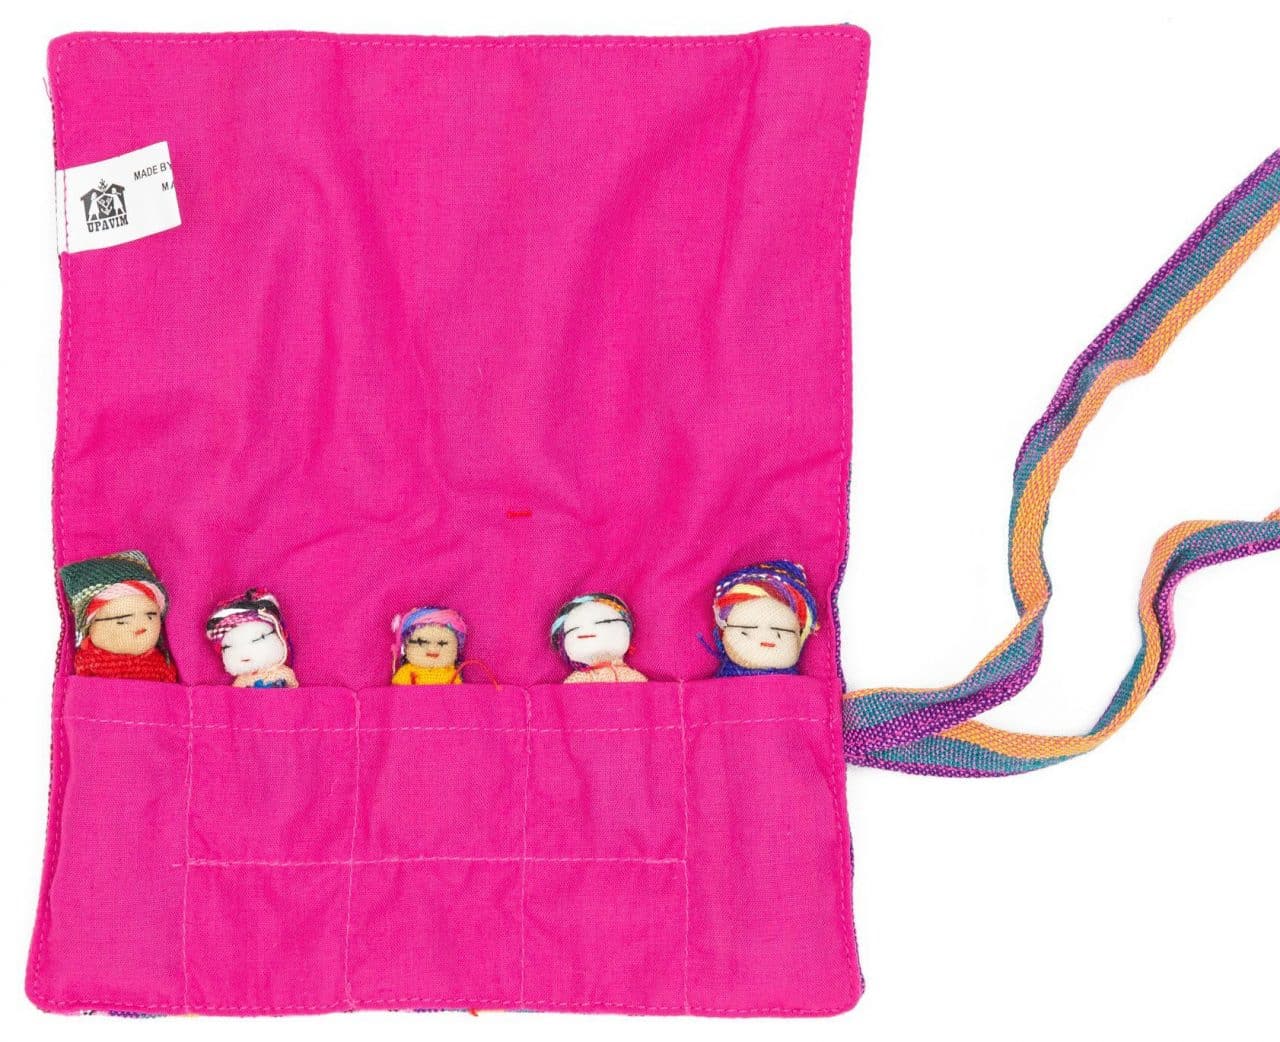 Roll-Up Worry Doll Playset